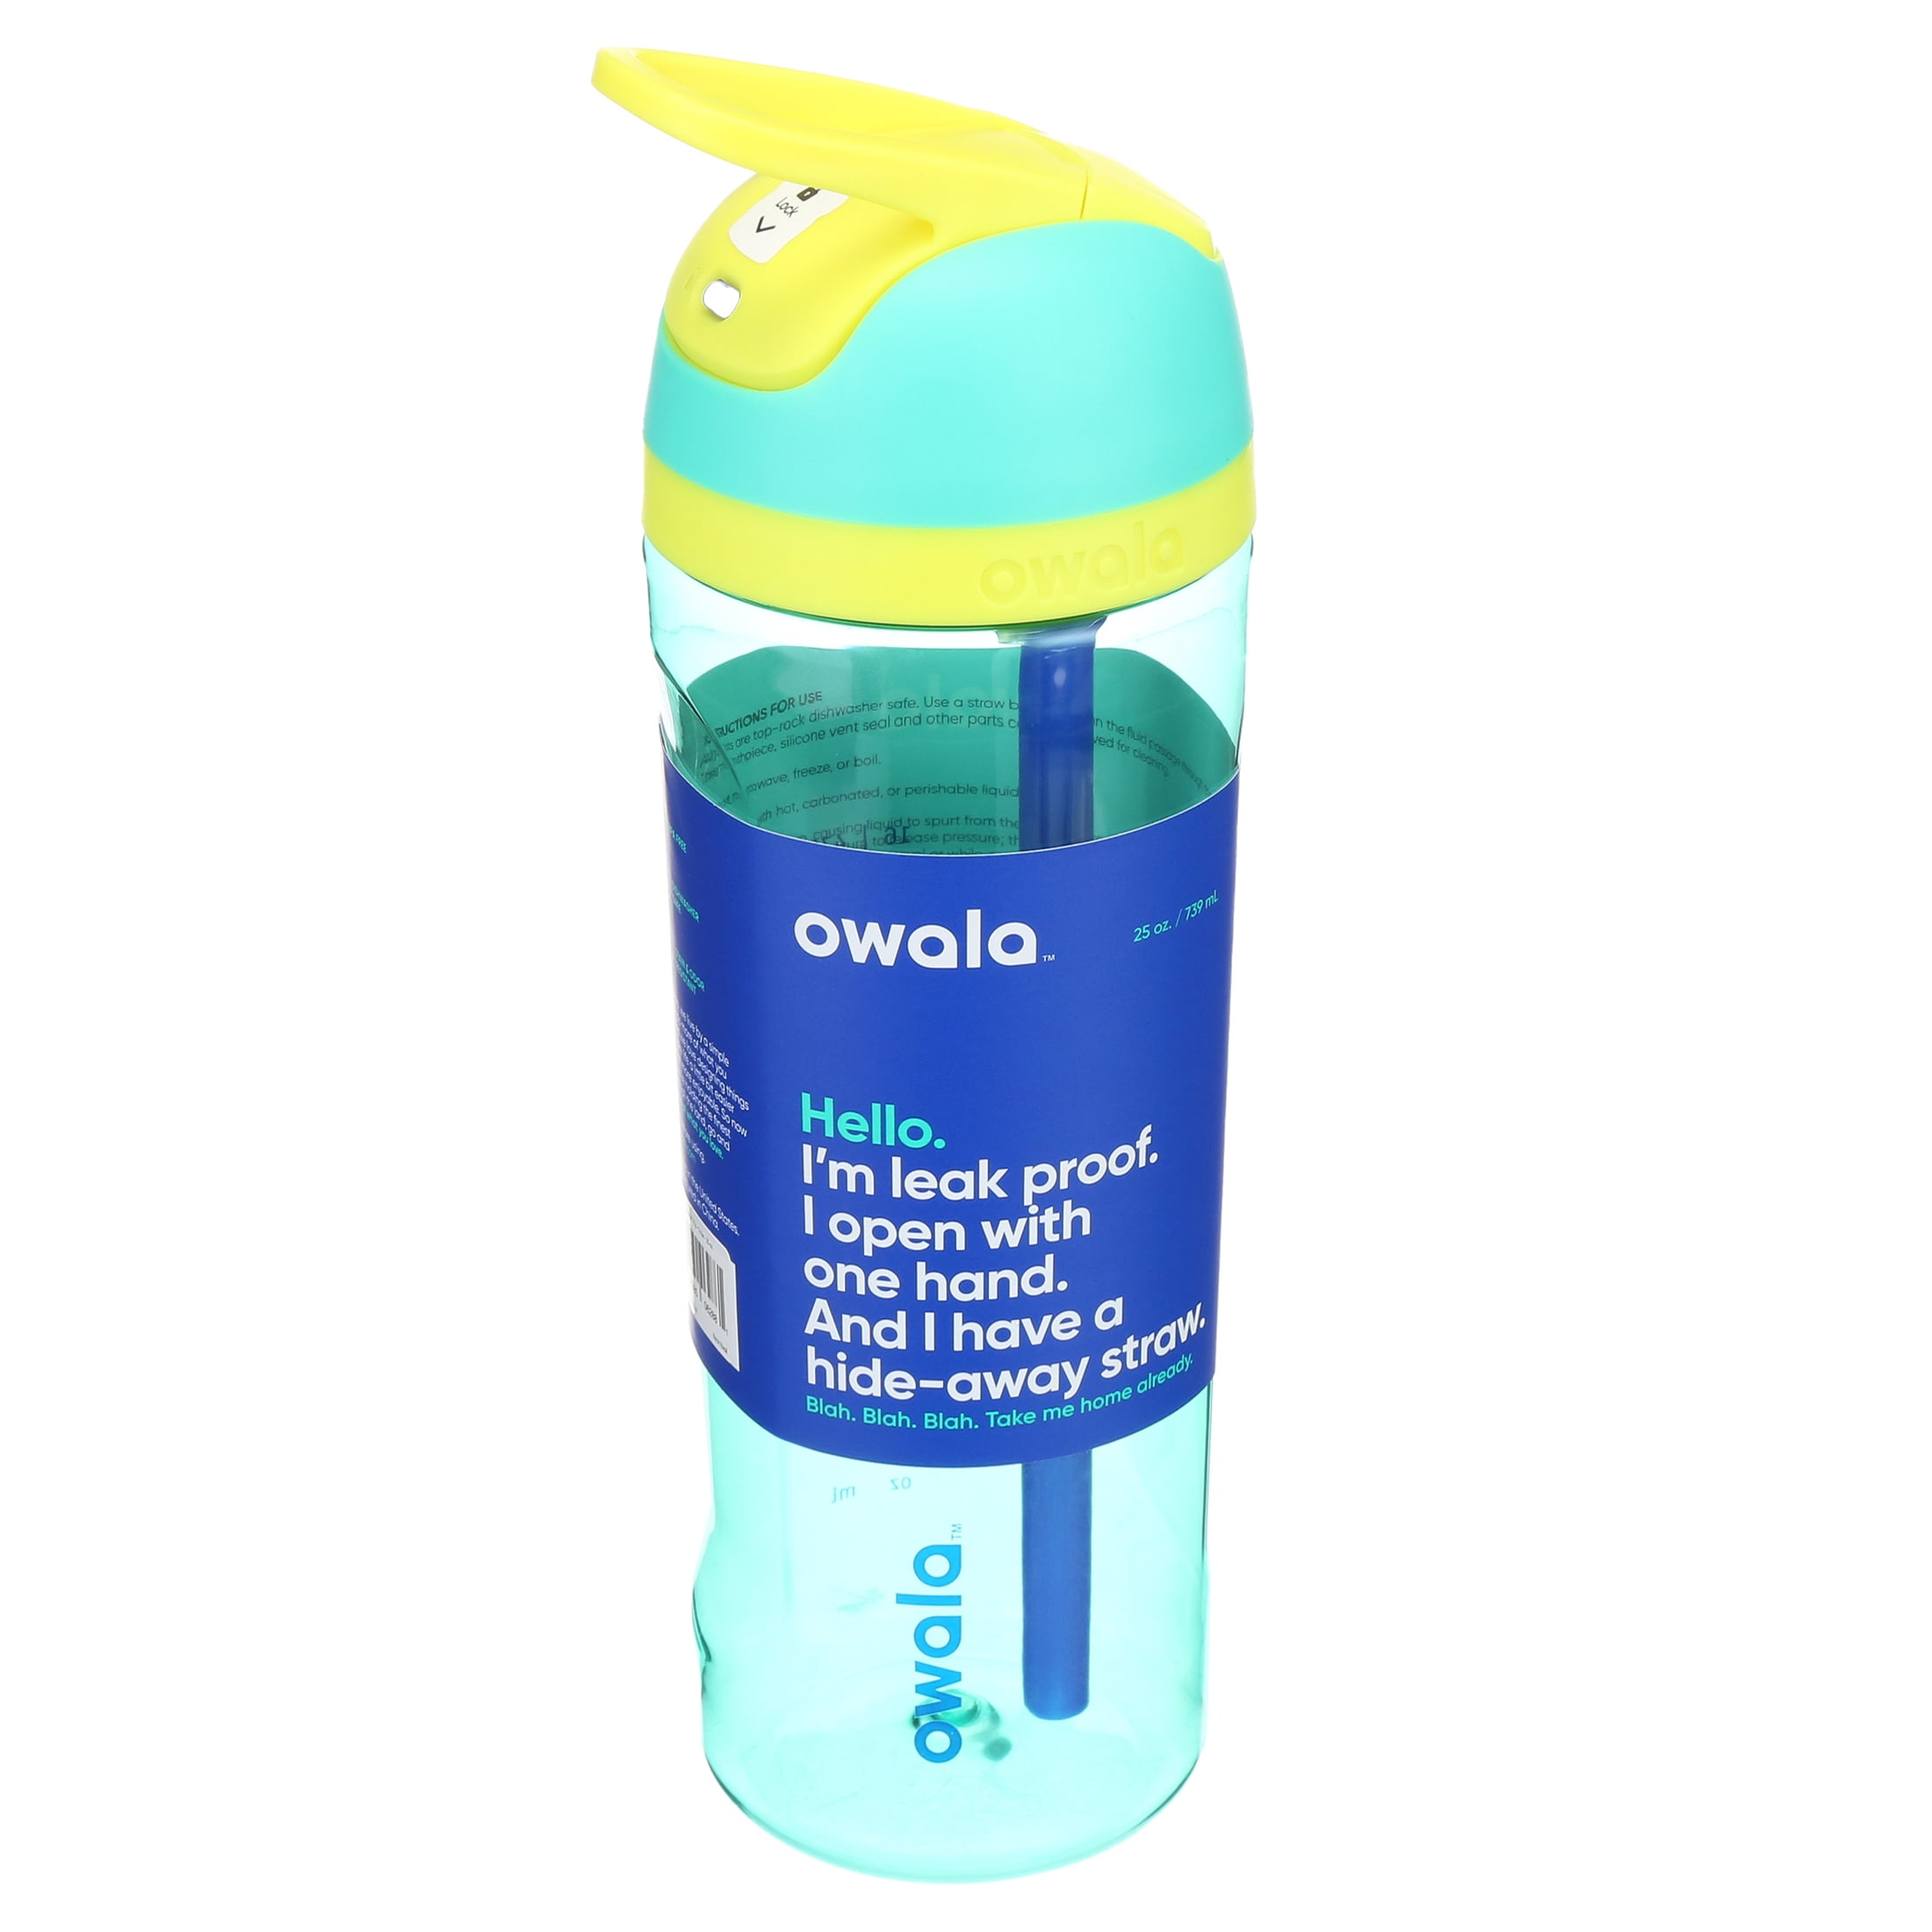 How Many Inches is a Water Bottle? – Owala